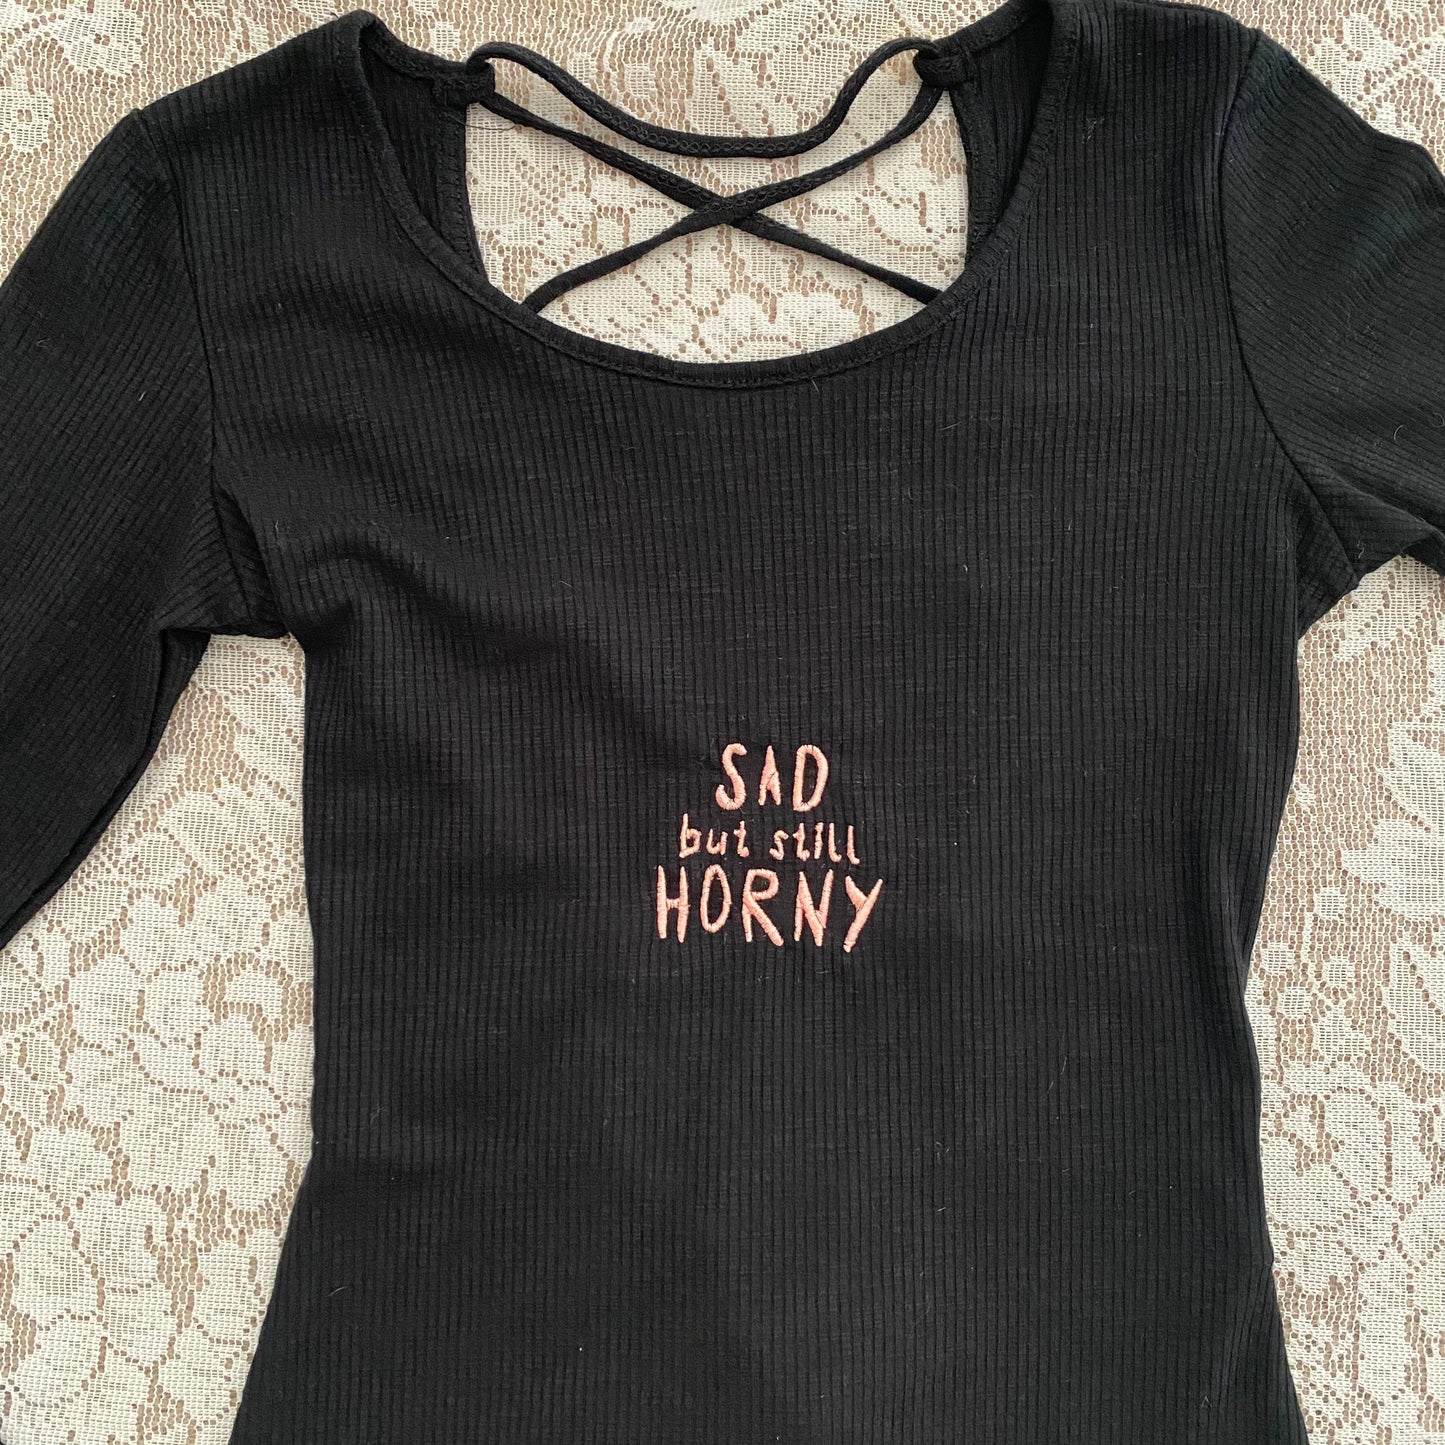 sad but horny embroidered bodysuit